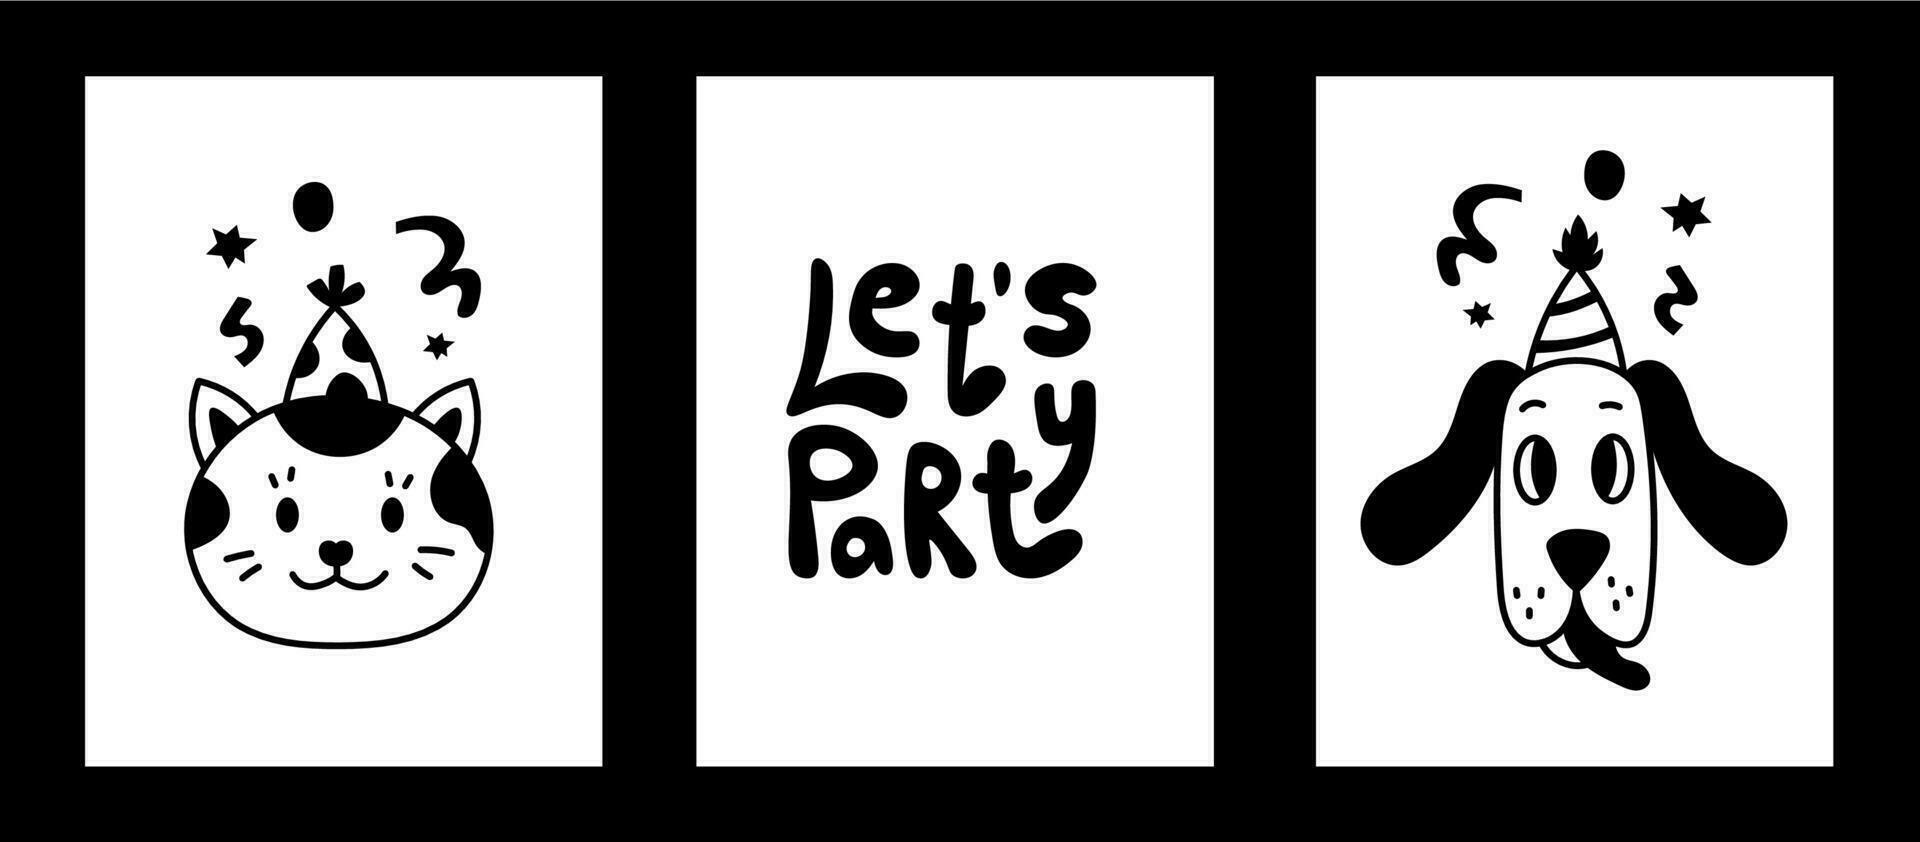 Pets party posters in doodle style vector